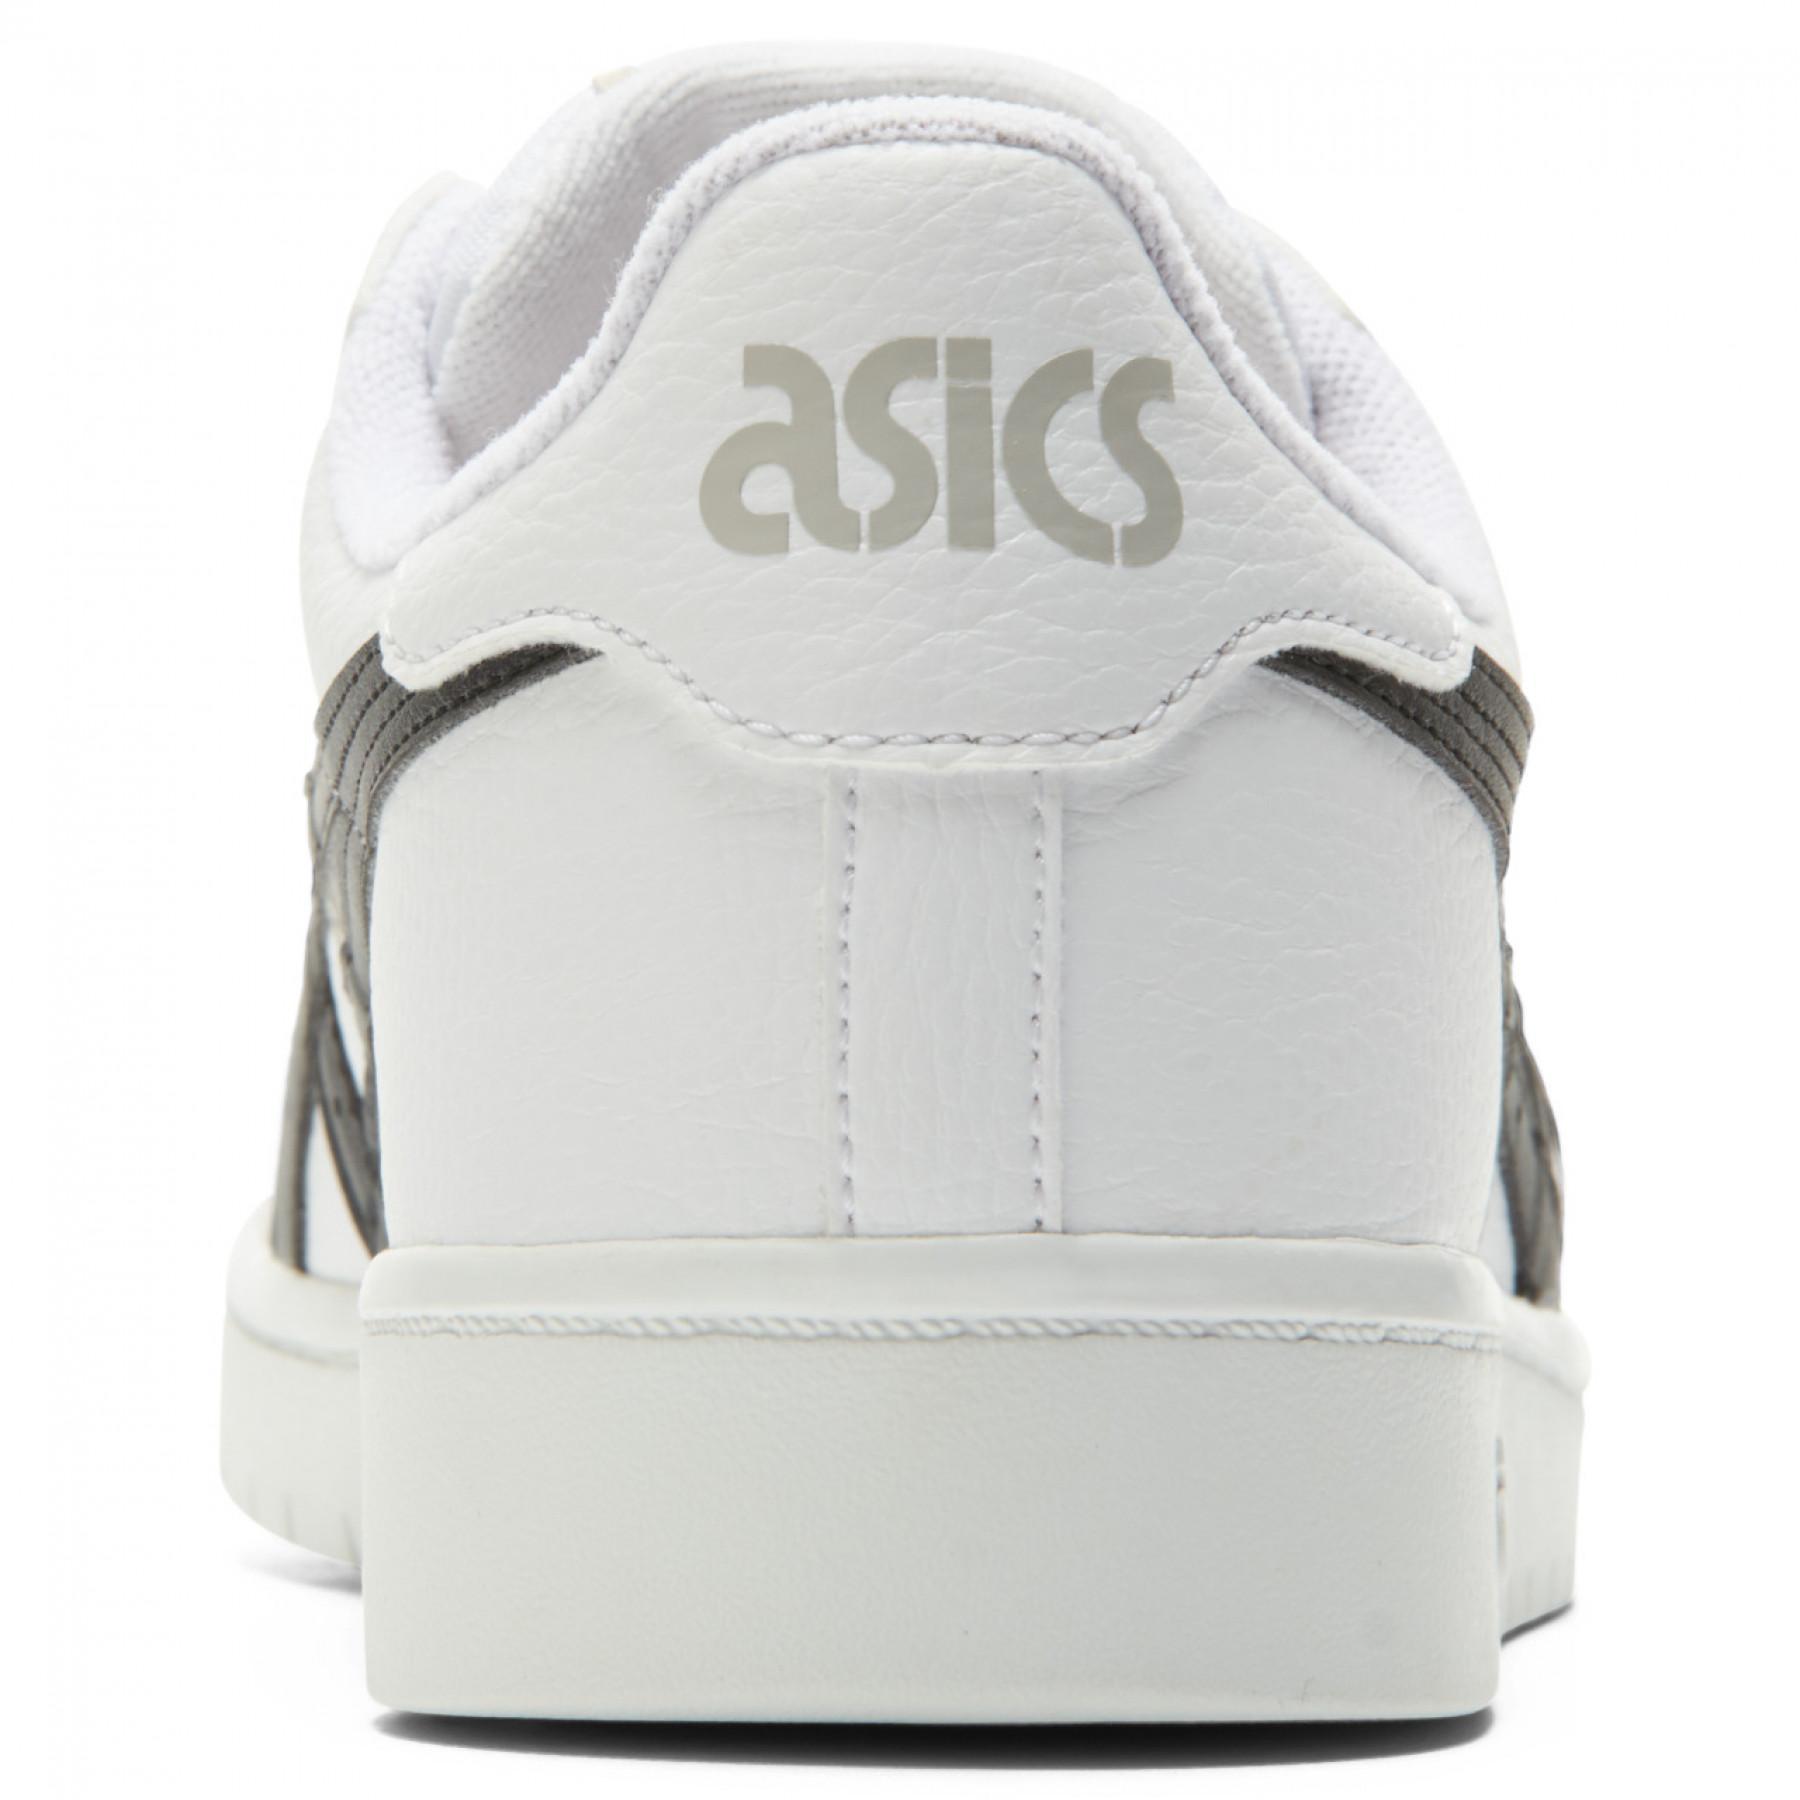 Trainers Asics Japan S